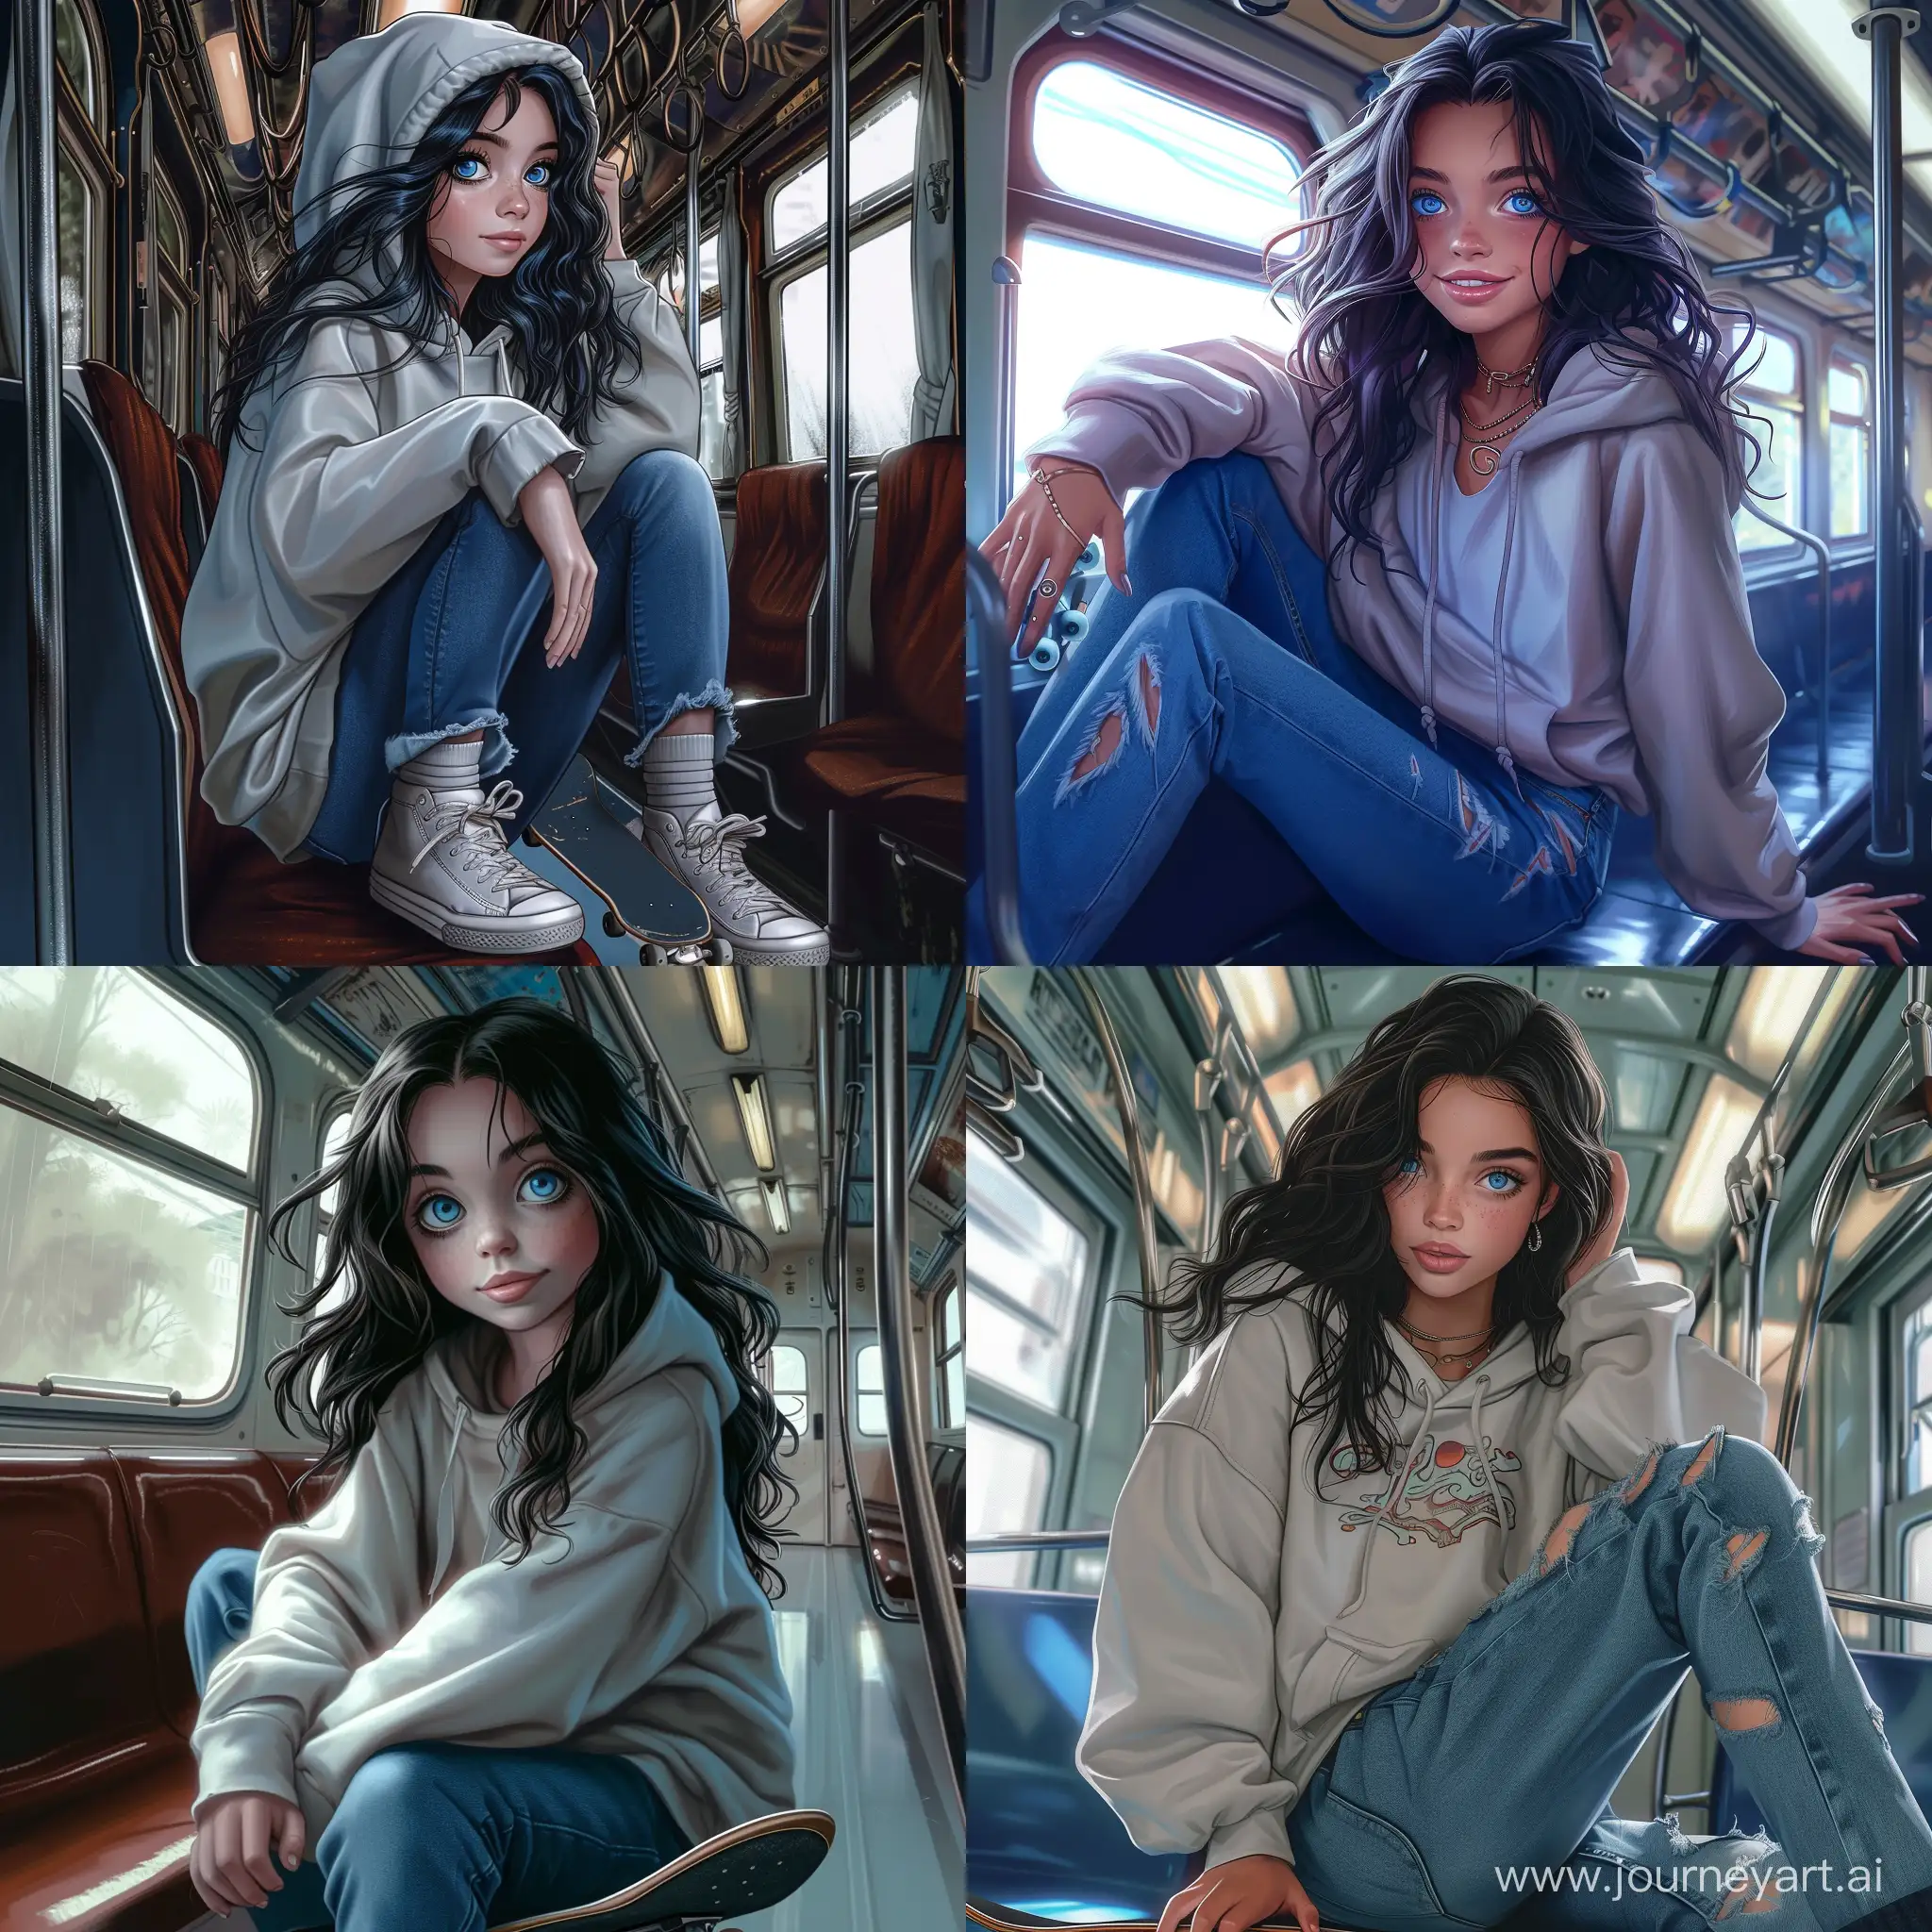 Beautiful girl, dark hair, blue eyes, white skin, teenager, 15 years old, summer, skateboarding, in an oversize hoodie and jeans, riding in a train carriage, compartment carriage, Hogwarts express, high quality, high detail, cartoon art